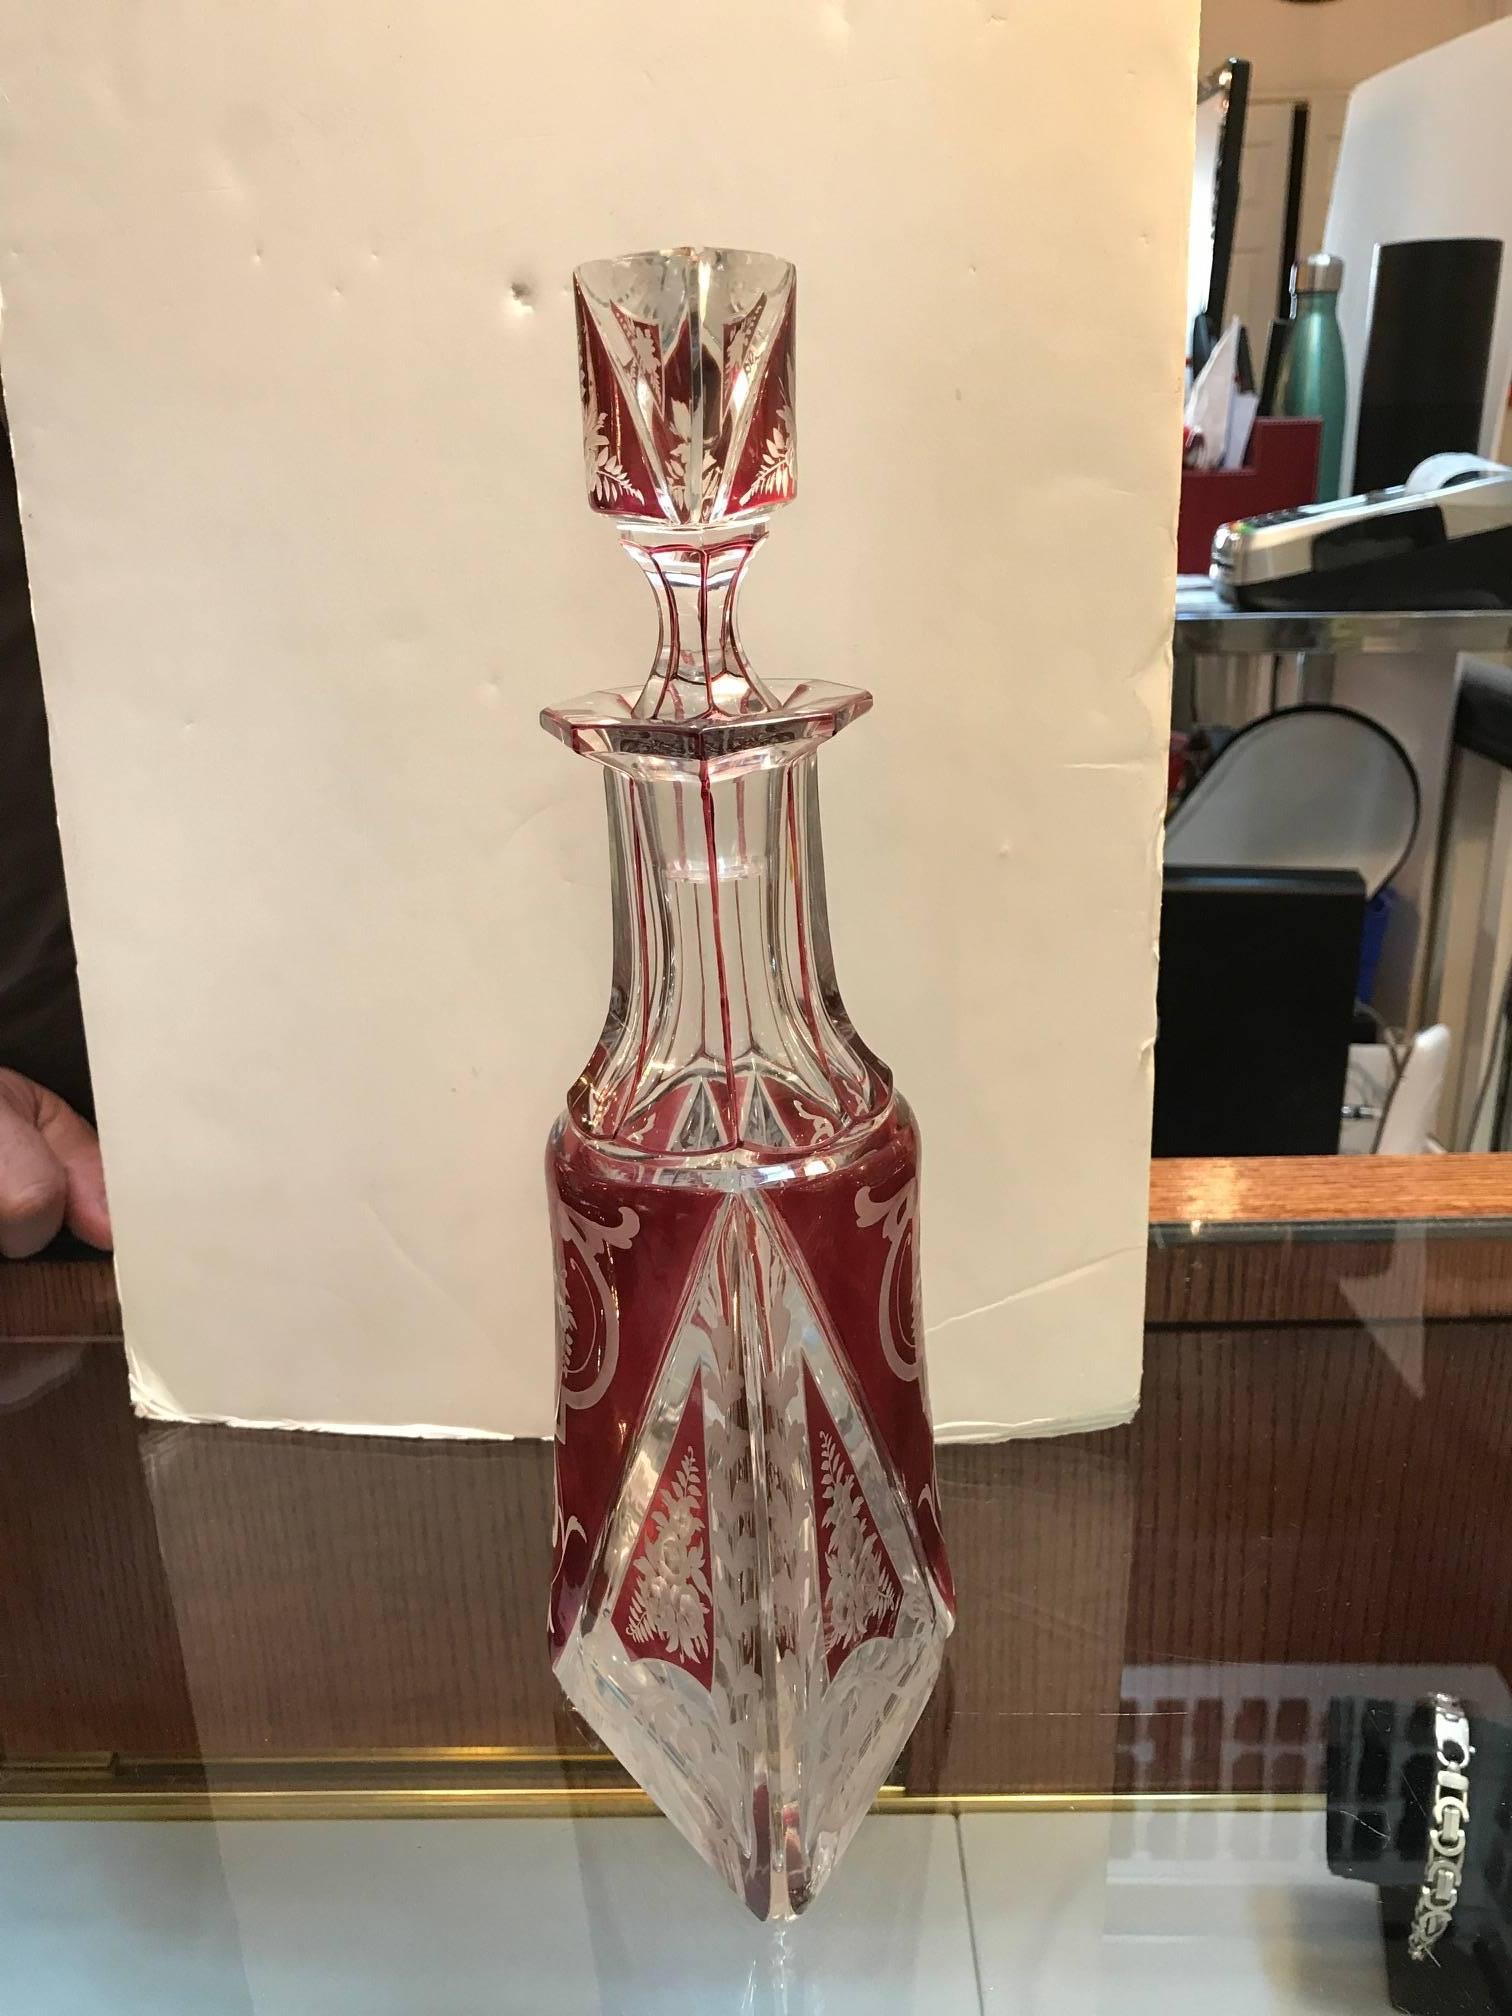 Graceful and elegant intaglio cut-glass tall decanter with original stopper. Panel cut neck with magnificent engraving of floral panels all around. The Violet highlights with a clear cut highly detailed design. Exceptional quality.